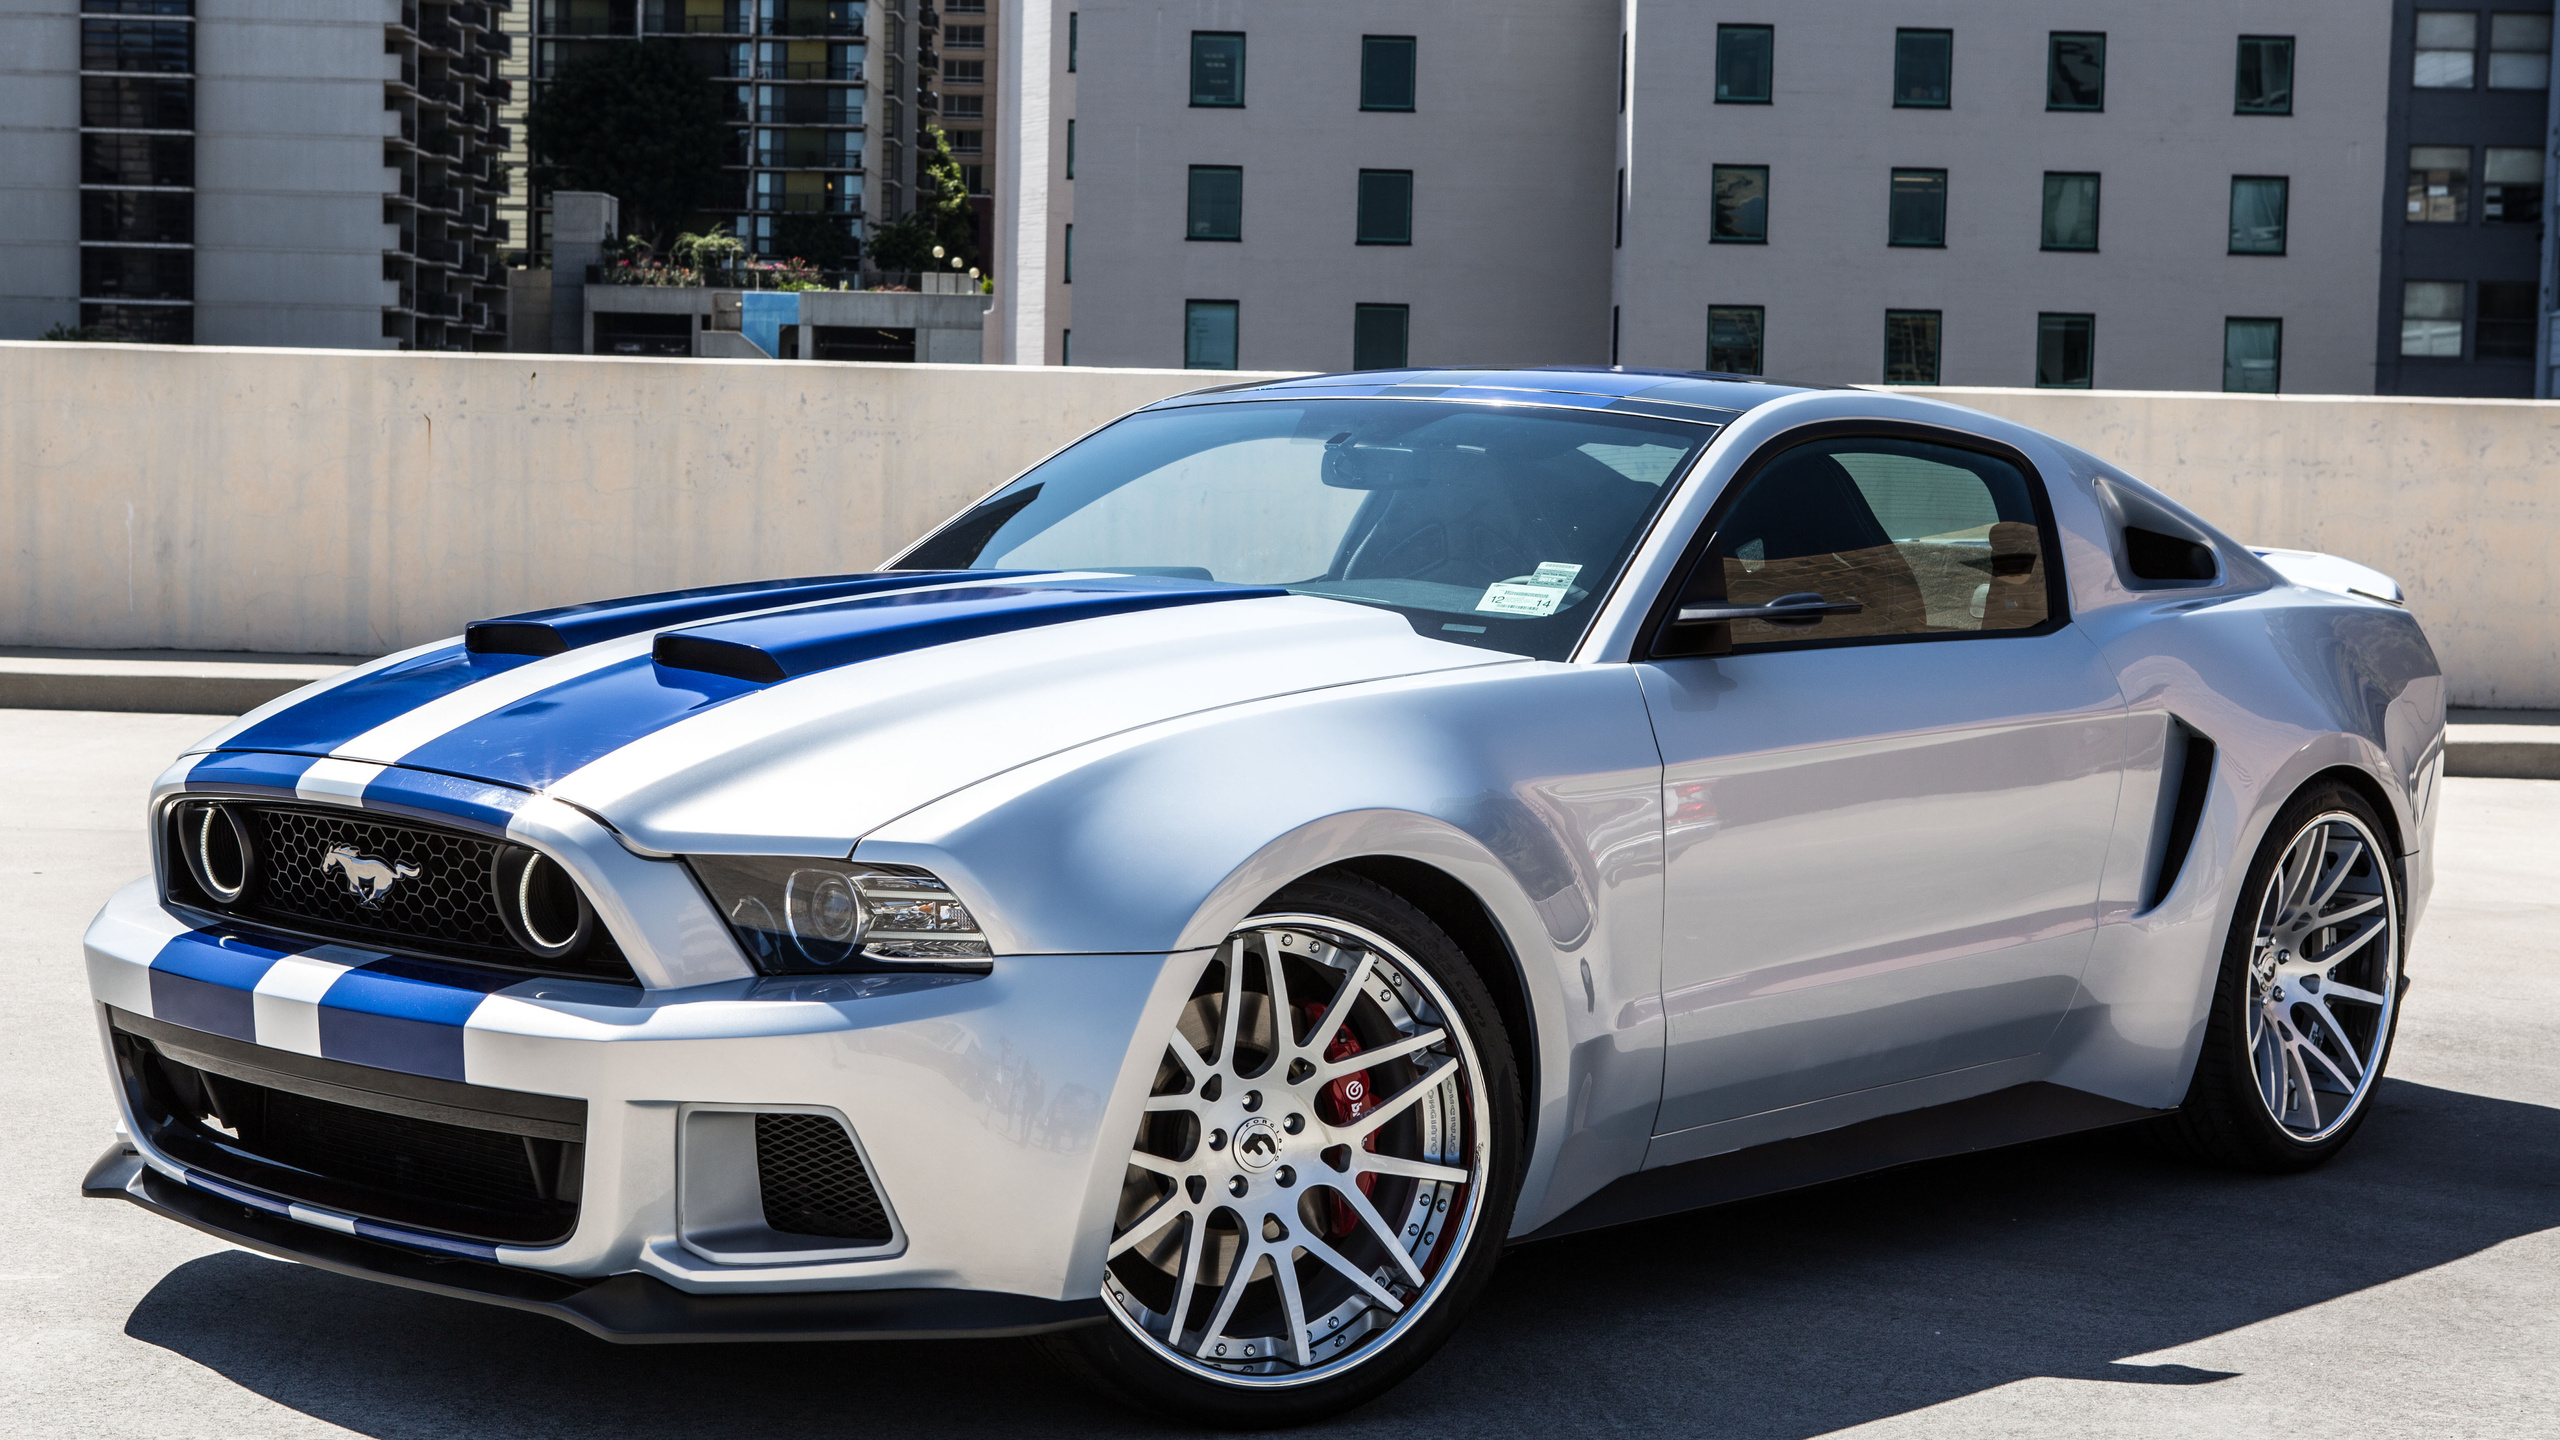 2560x1440 > Ford Shelby Wallpapers